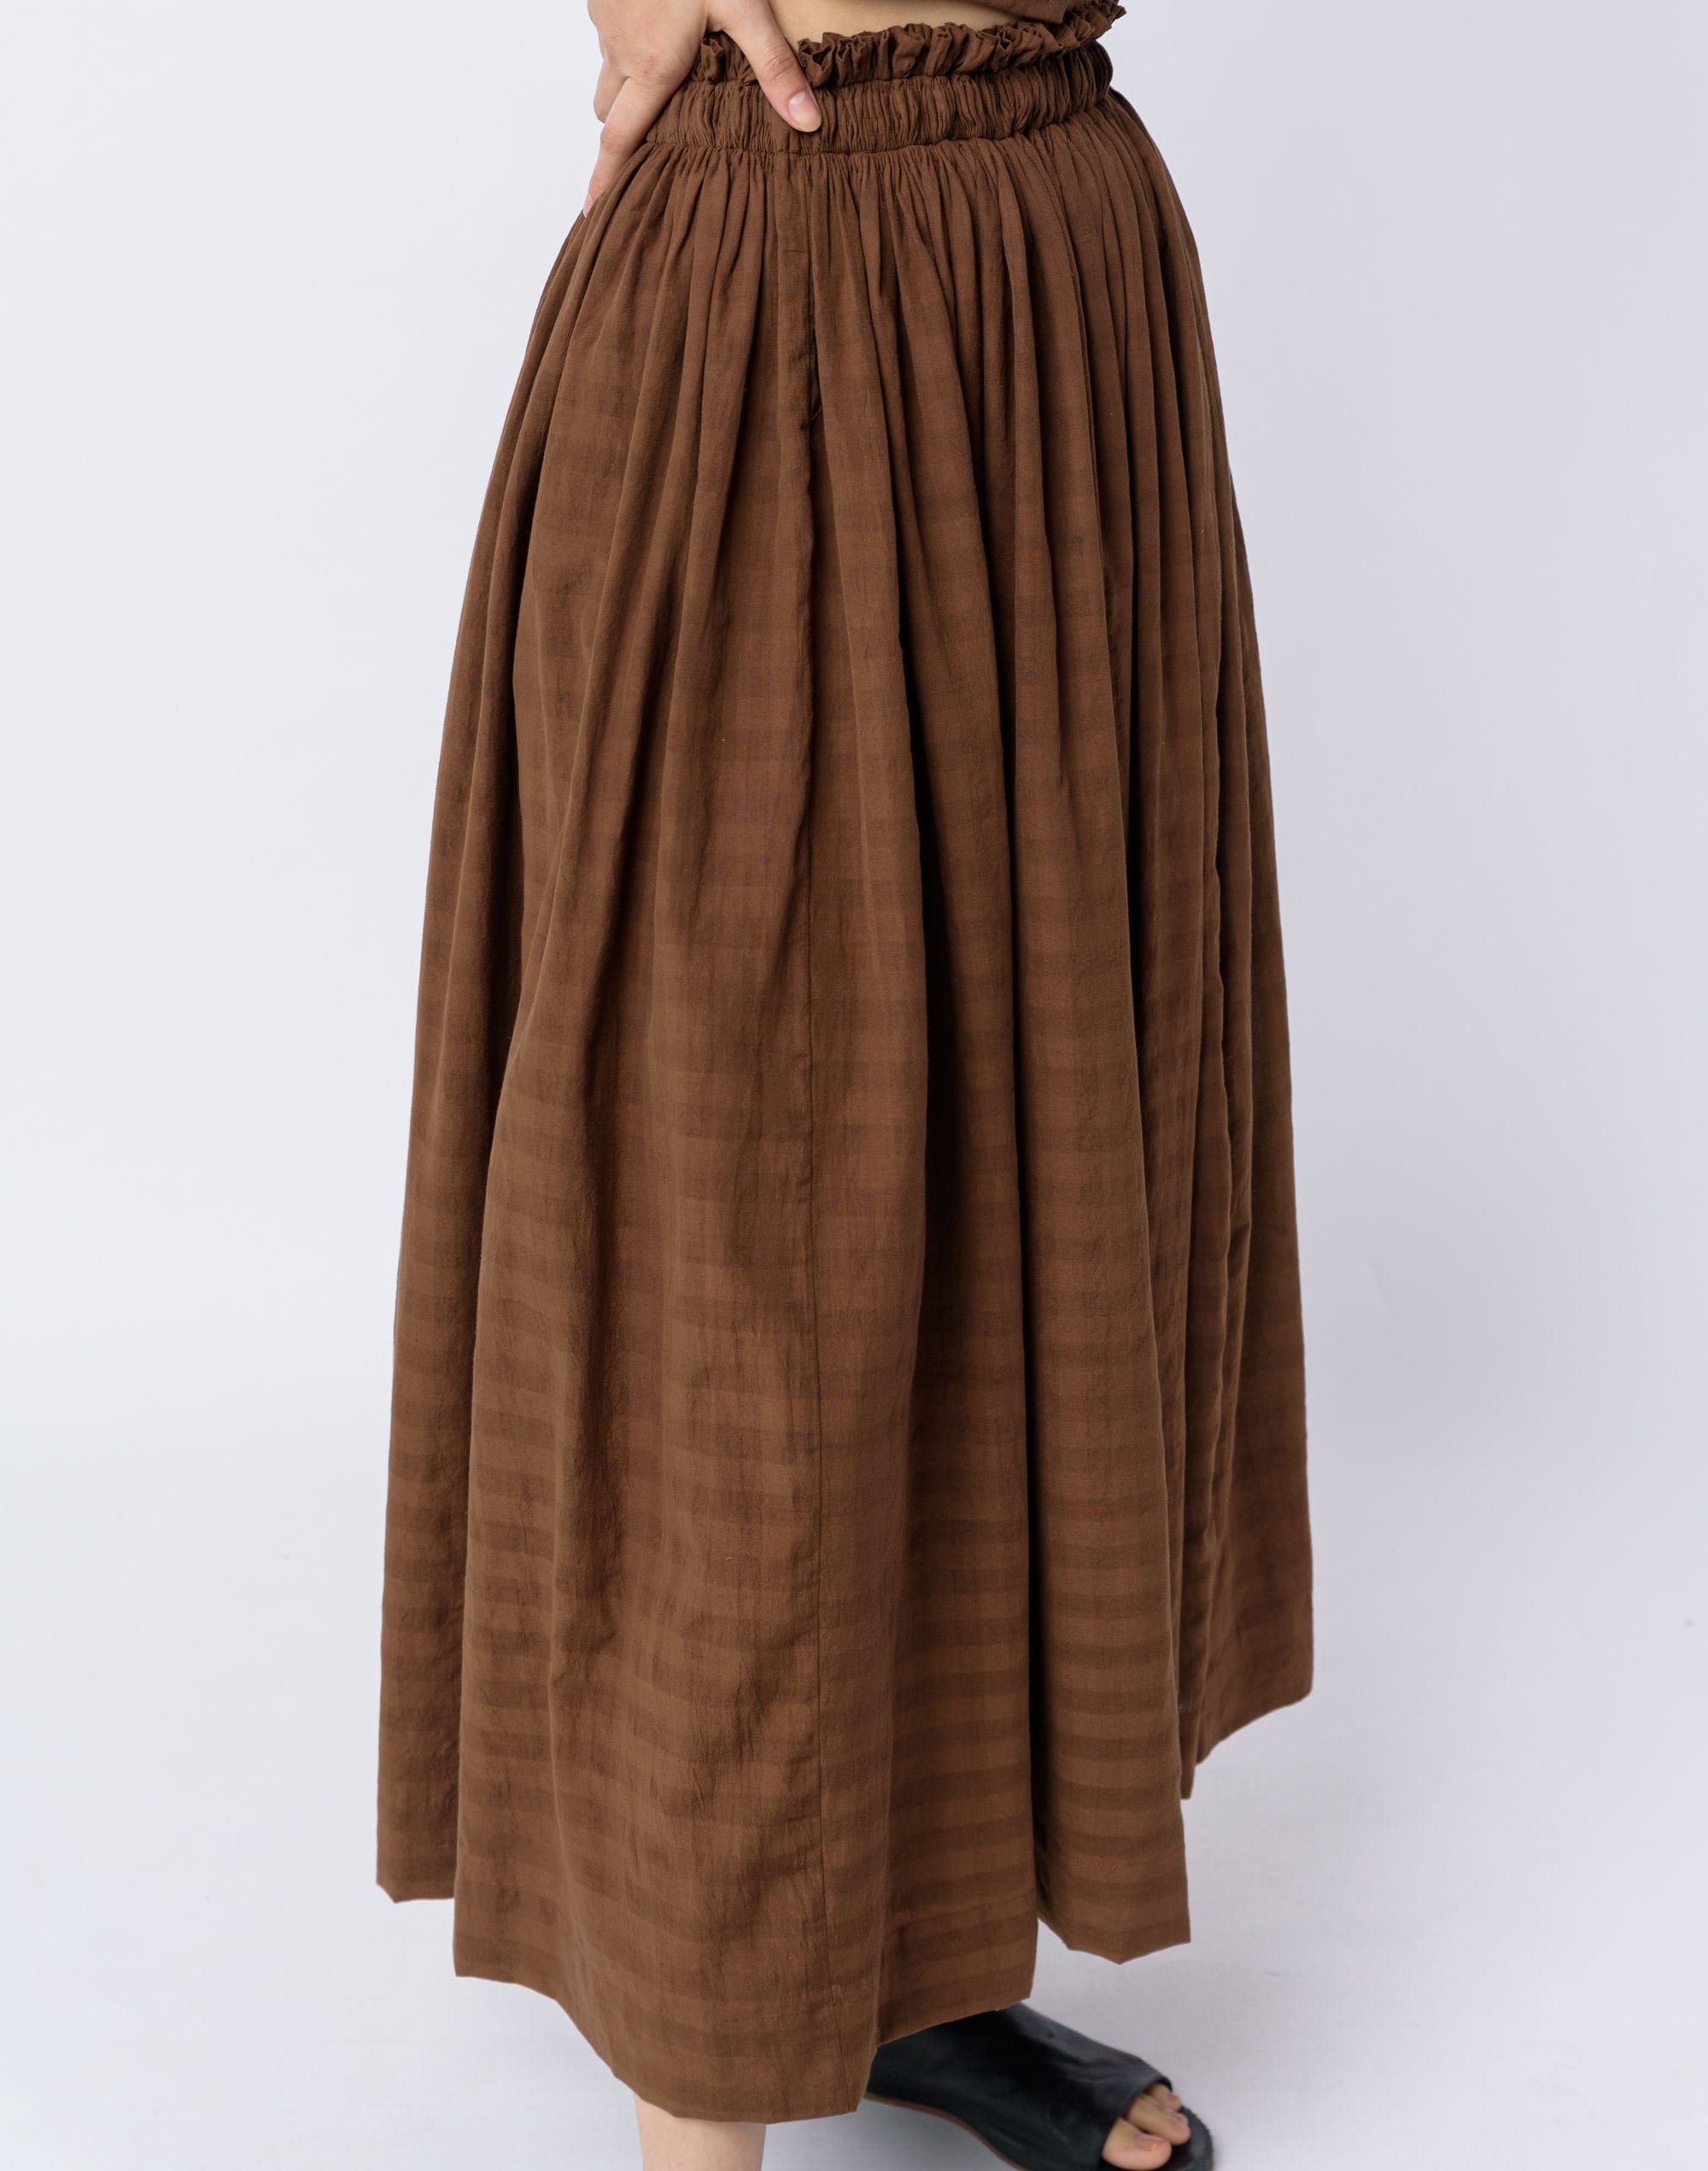 World of Crow Antique brown pull-on skirt